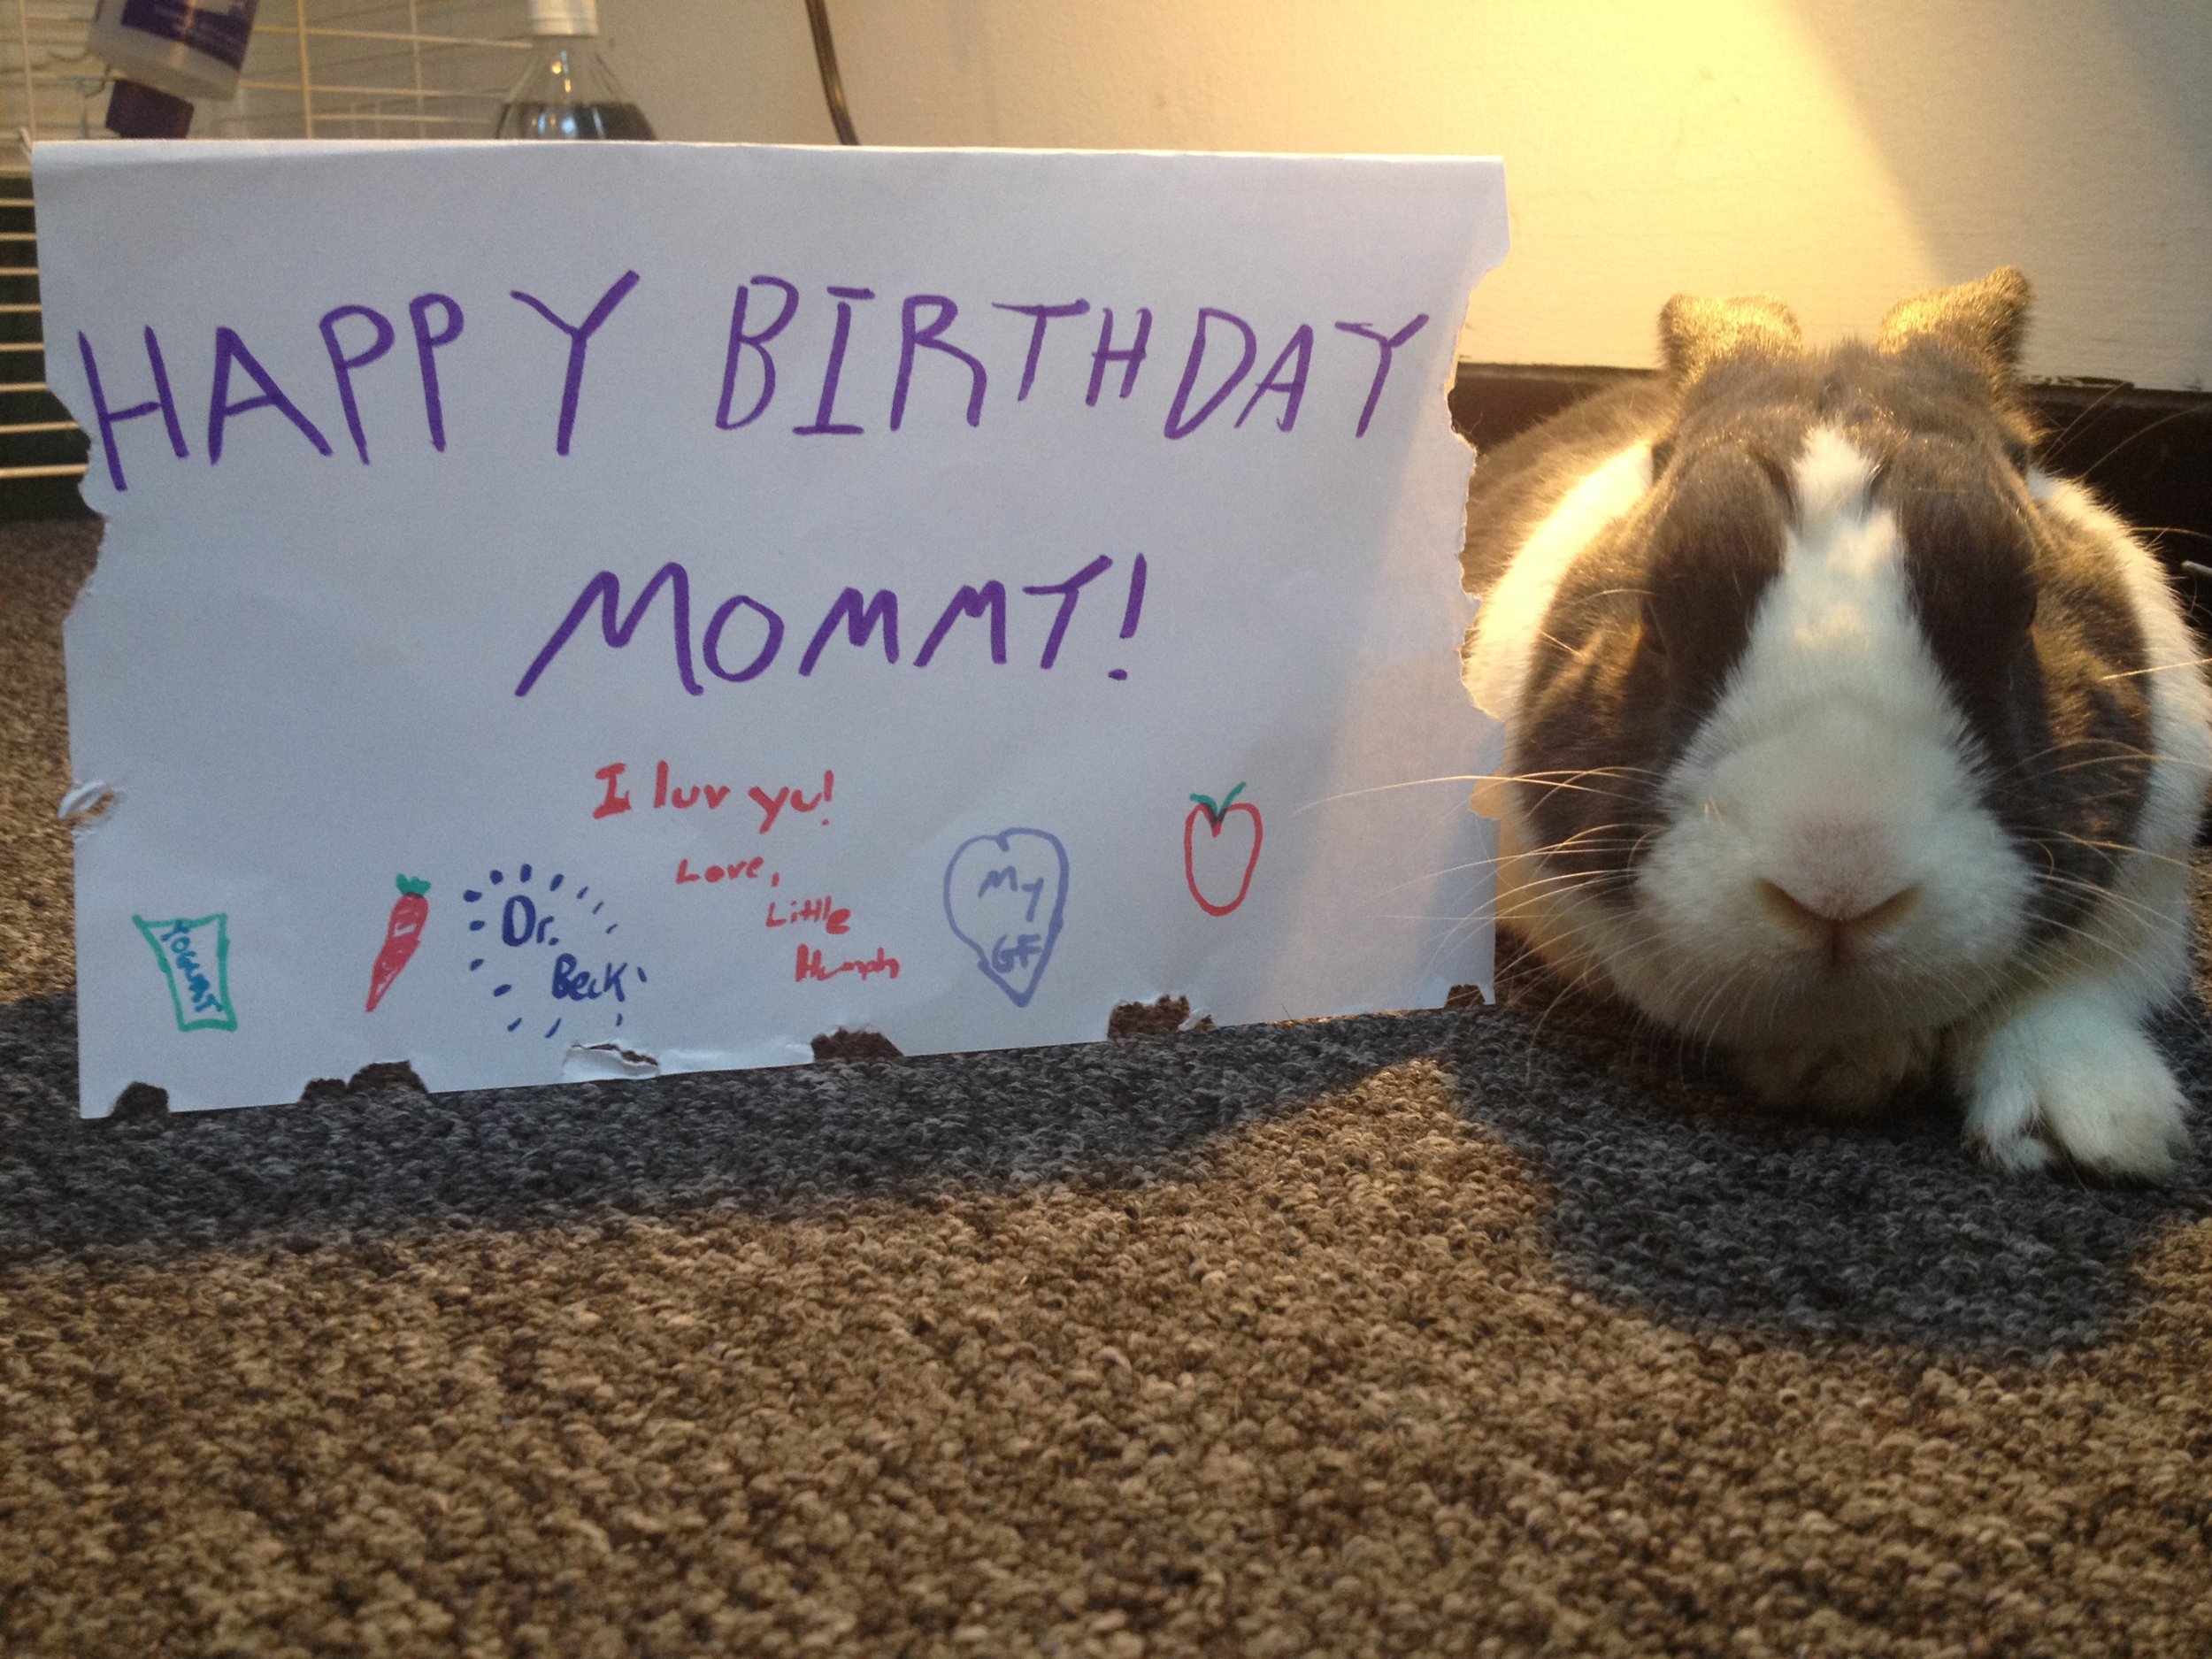 Bunny Wishes His Human a Happy Birthday